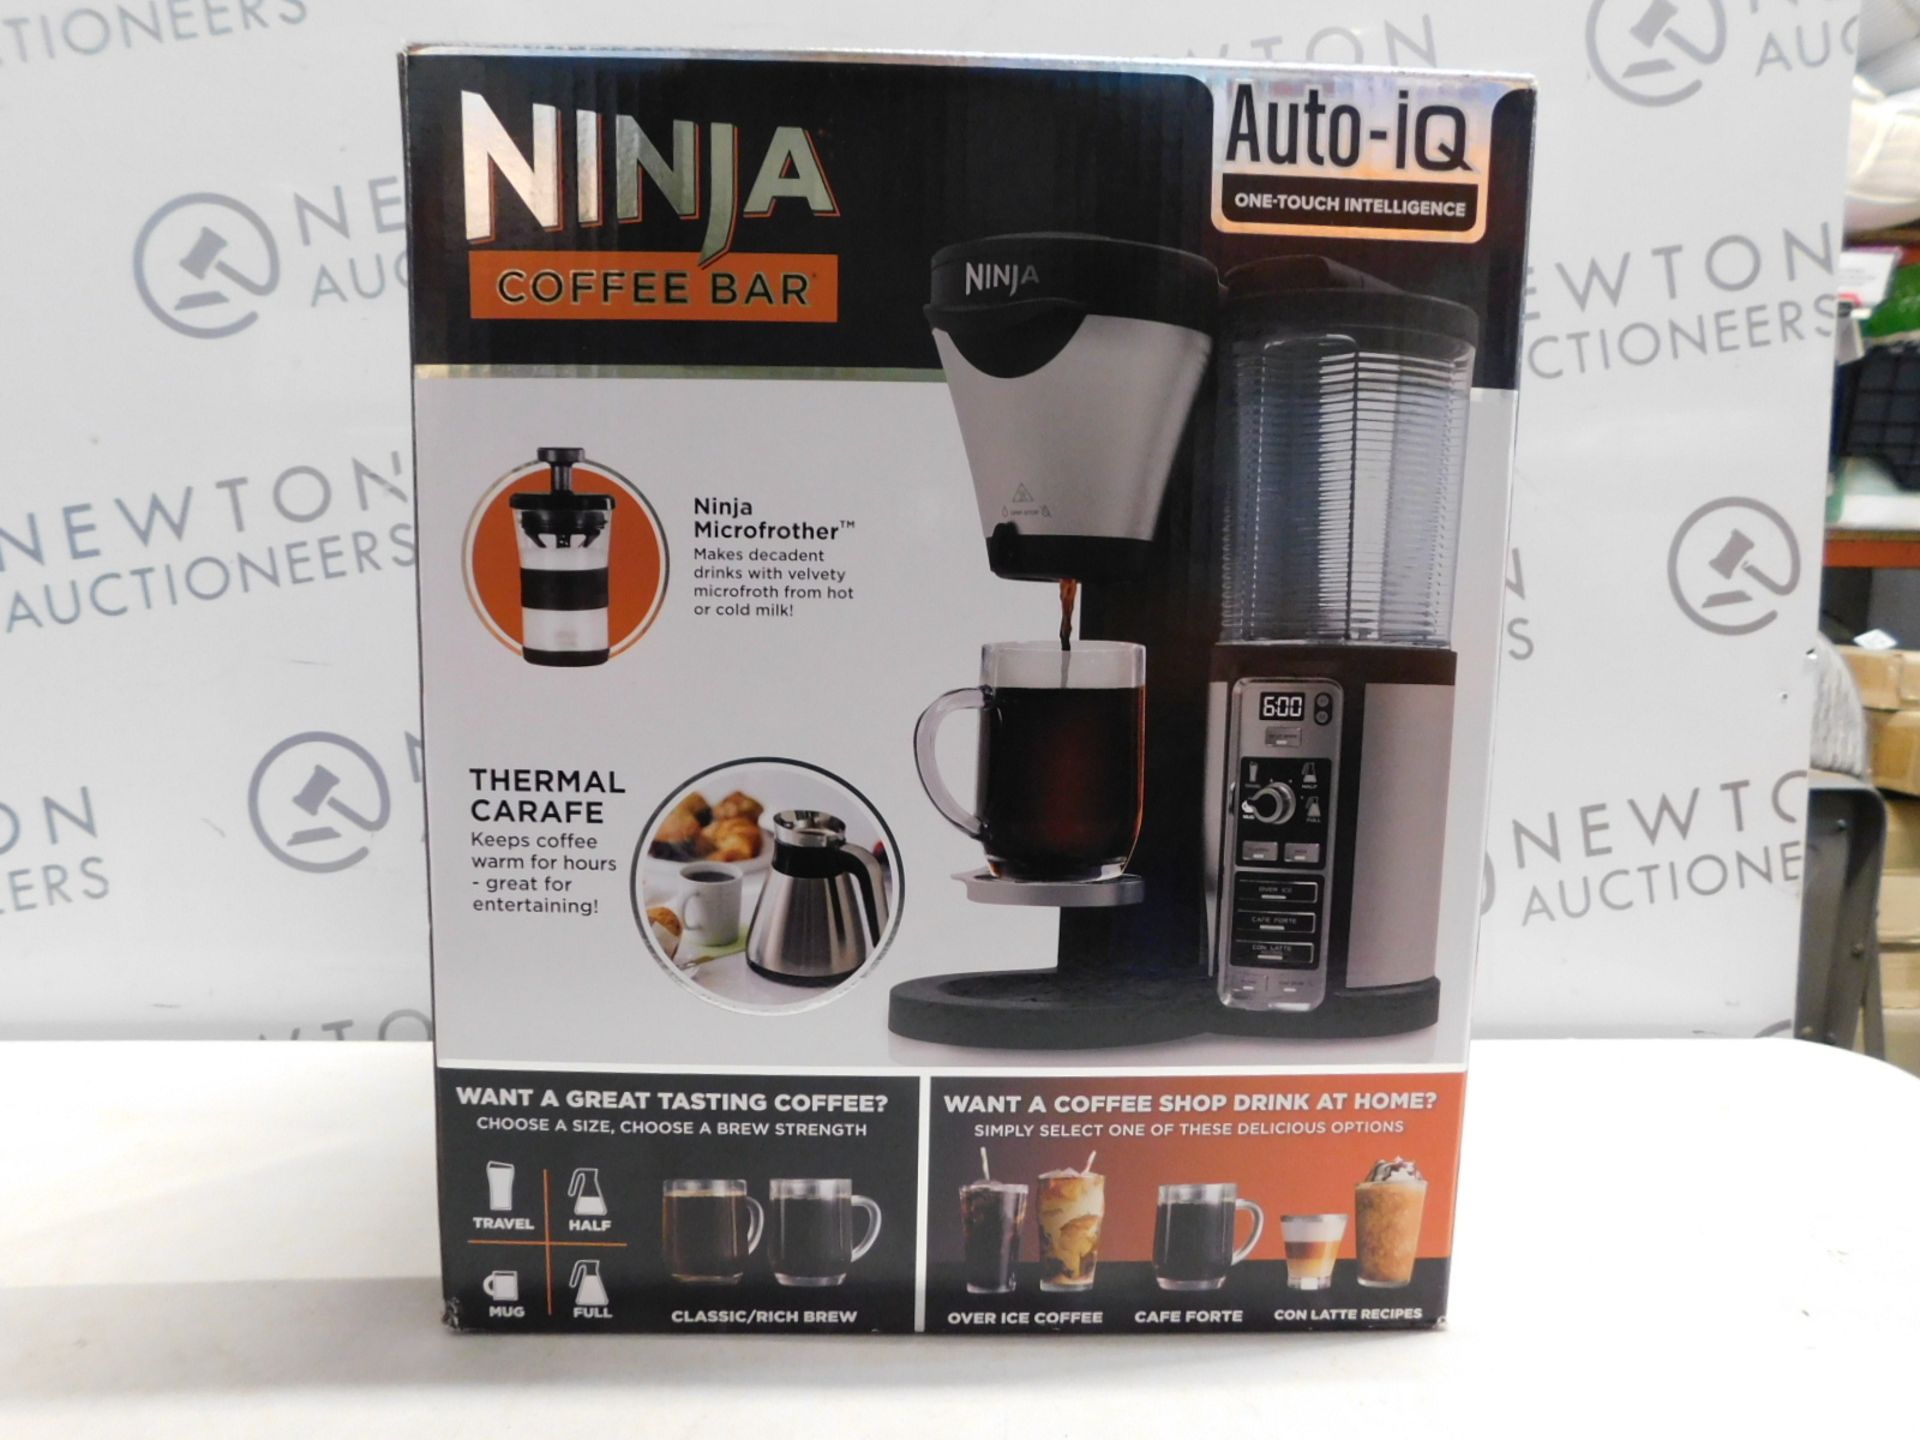 1 BOXED NINJA COFFEE BAR AUTO-IQ BREWER WITH THERMAL CARAFE RRP £179.99